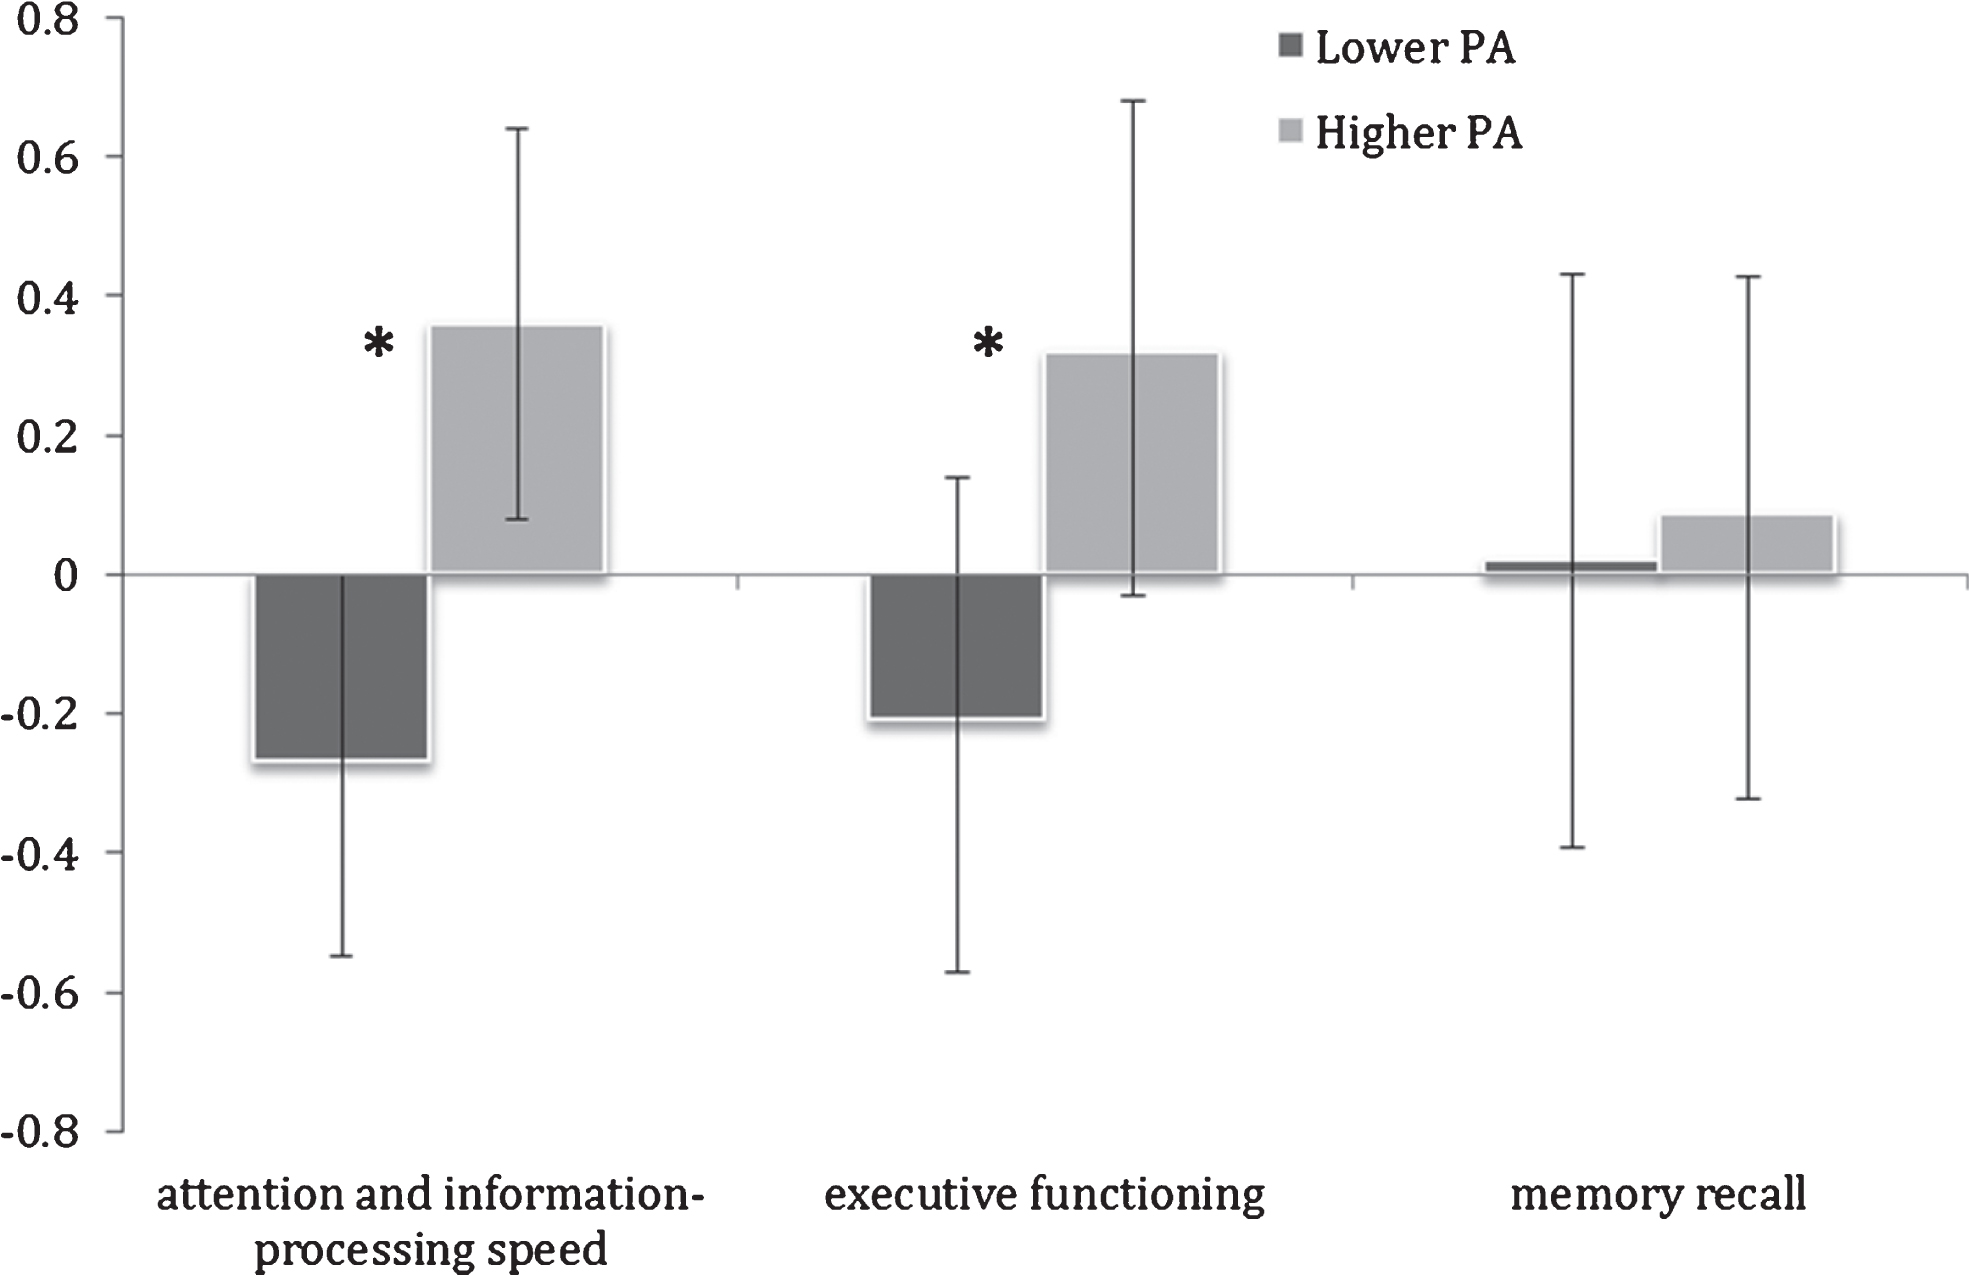 Mean cognitive domain Z-scores in lower and higher physical activity (PA) groups. Error bars represent 95% confidence limits; *p < 0.05